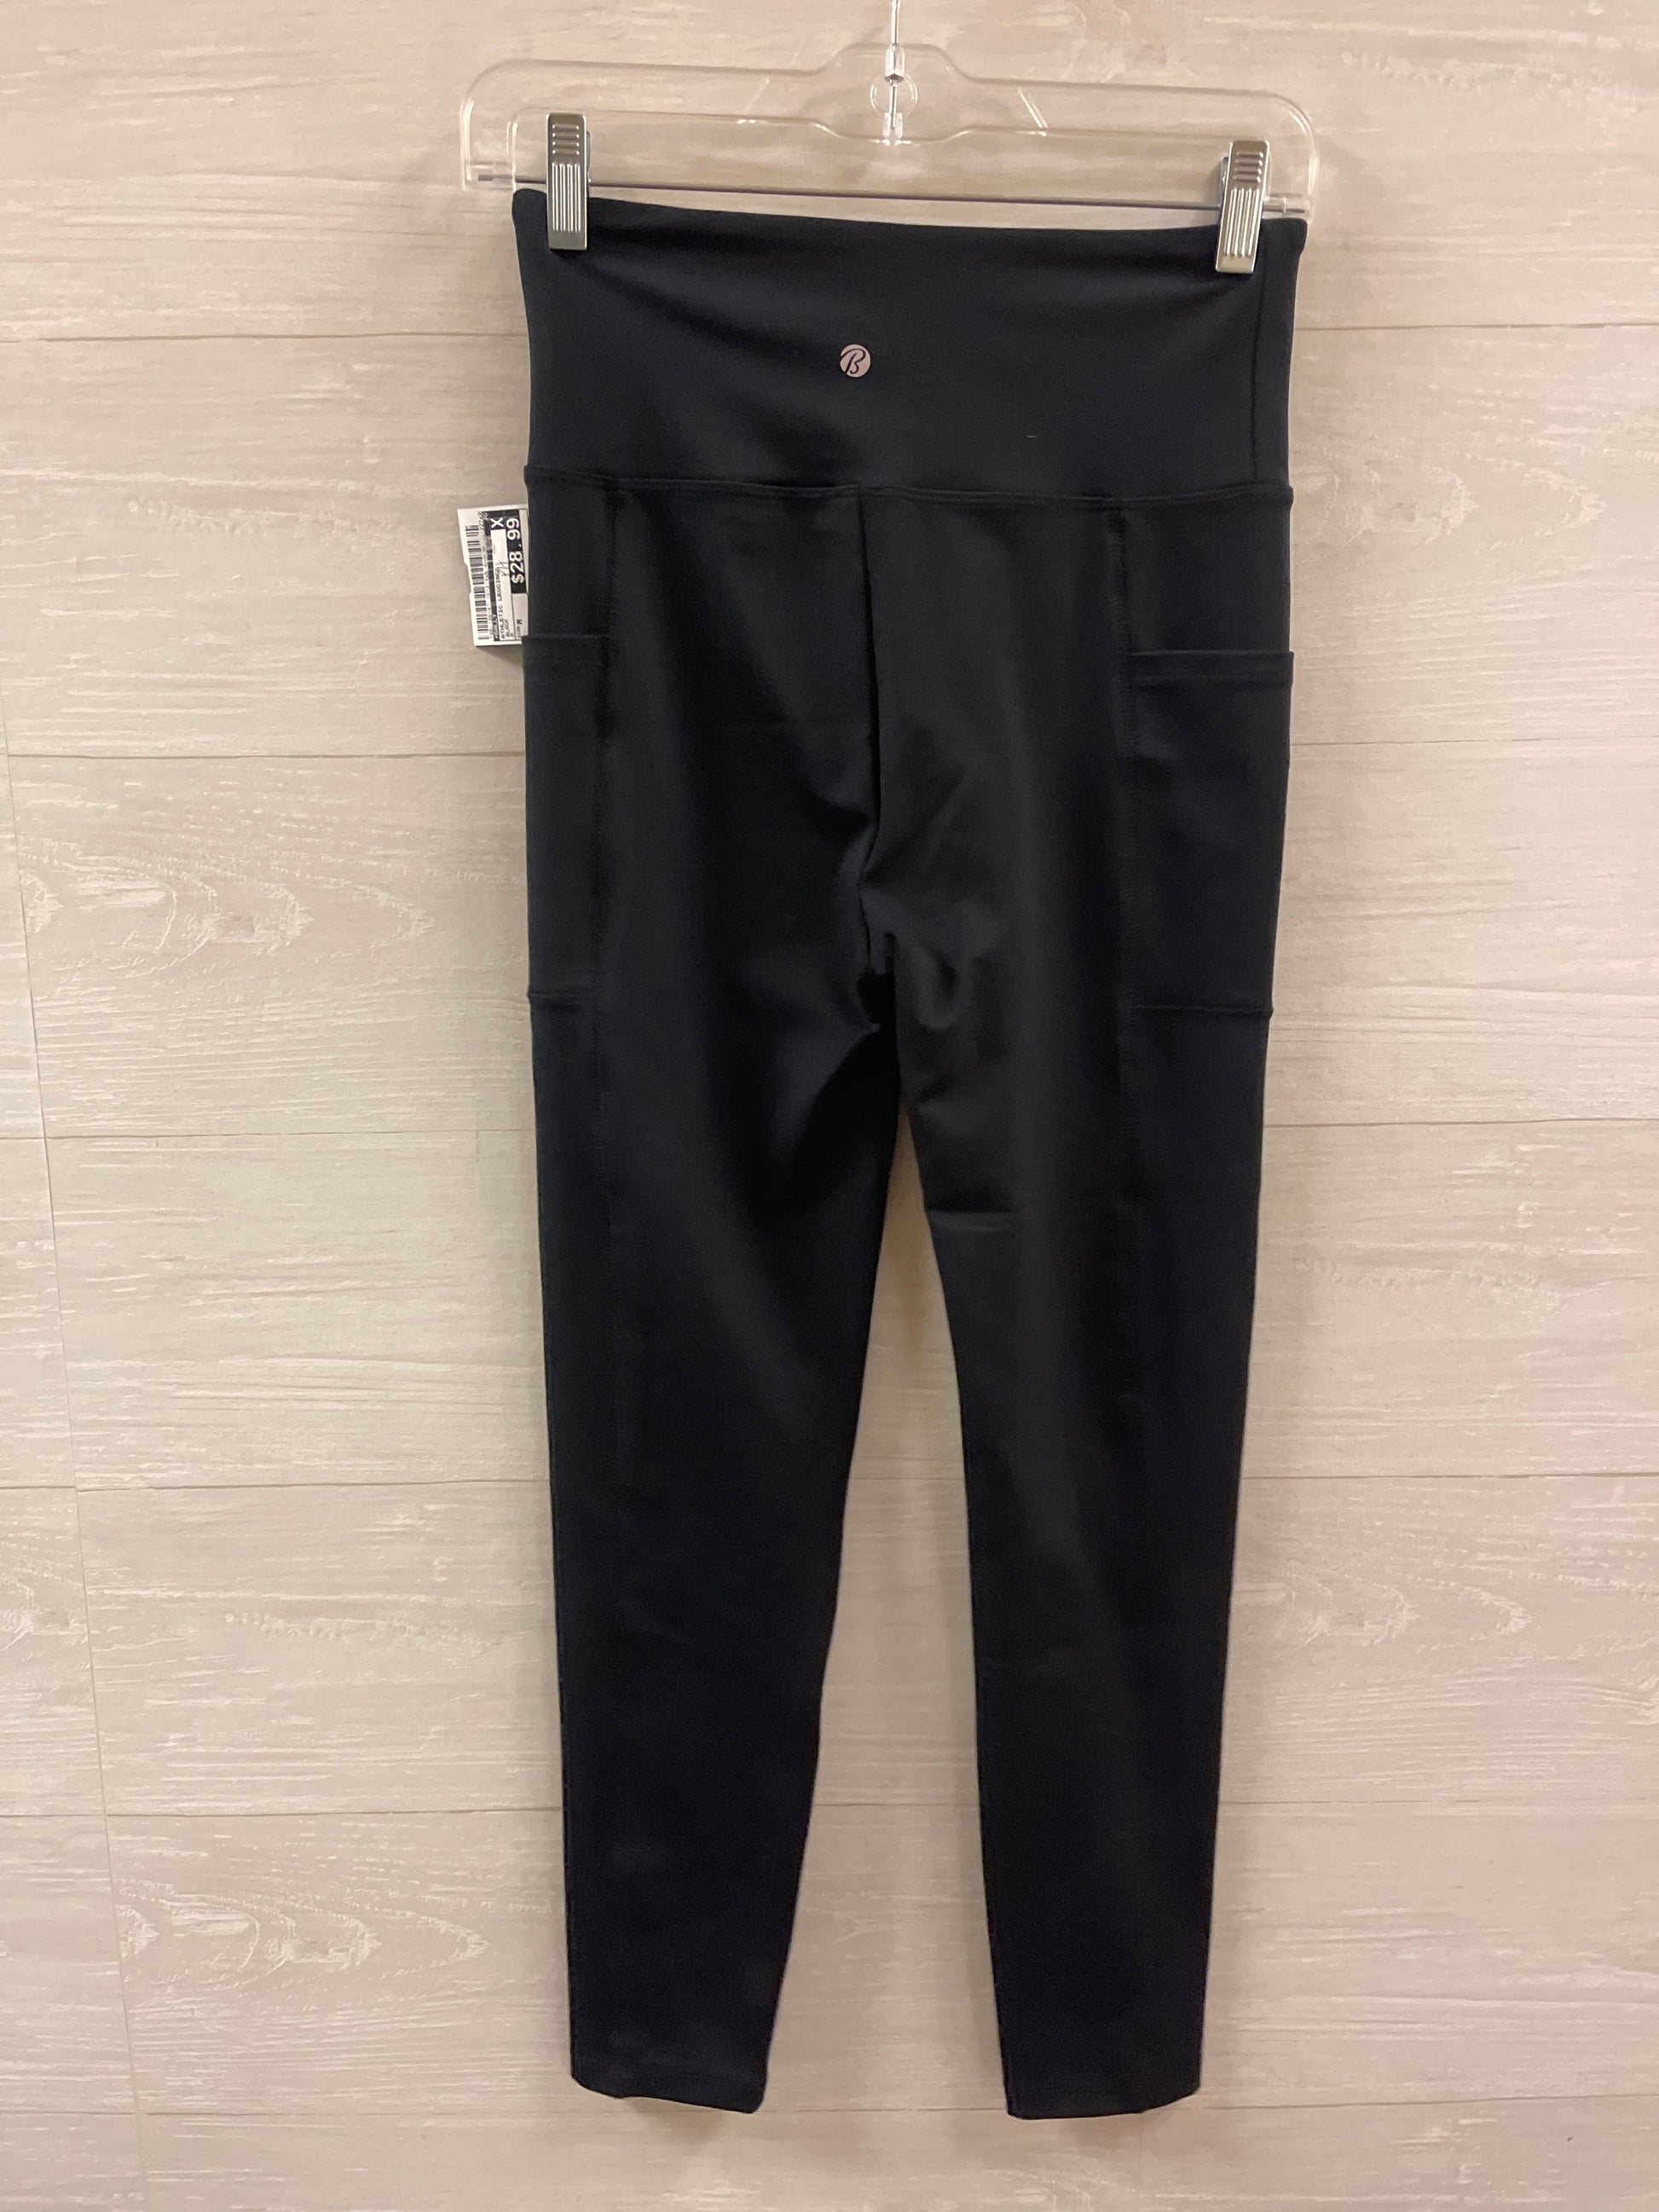 Athletic Leggings By Bally Size: M